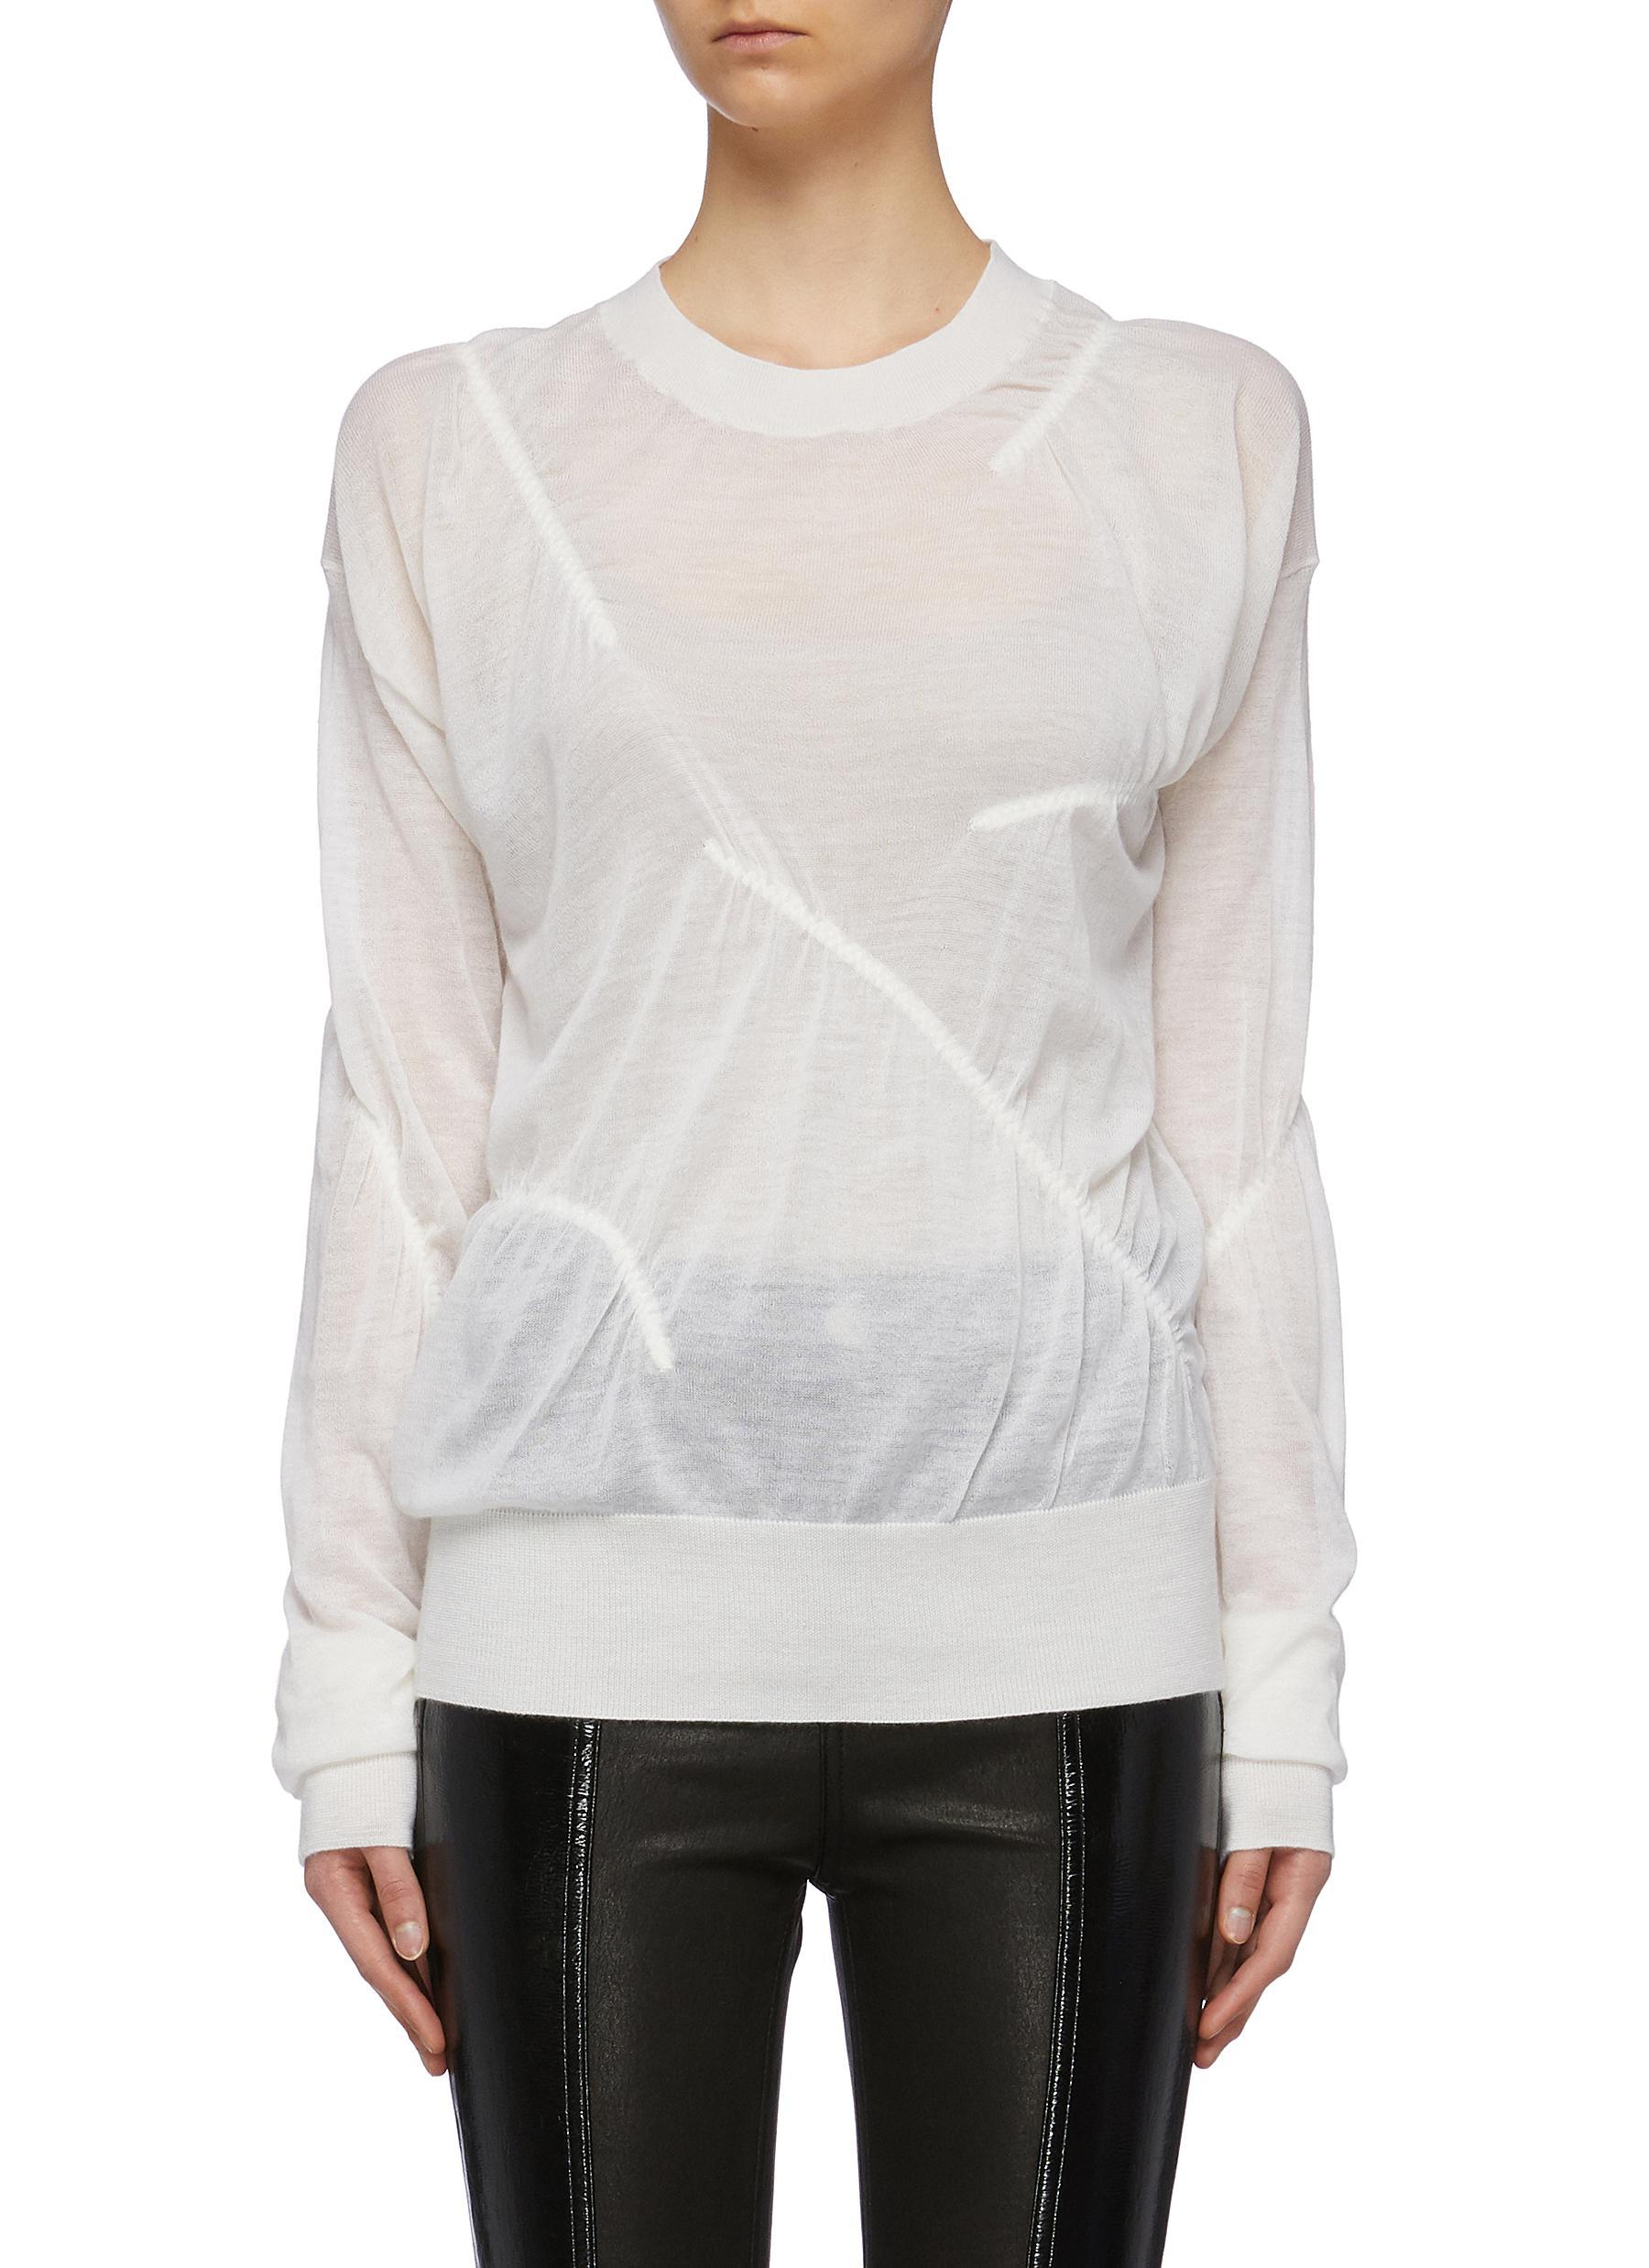 Helmut Lang Gathered Panelled Cashmere Sweater in White - Lyst